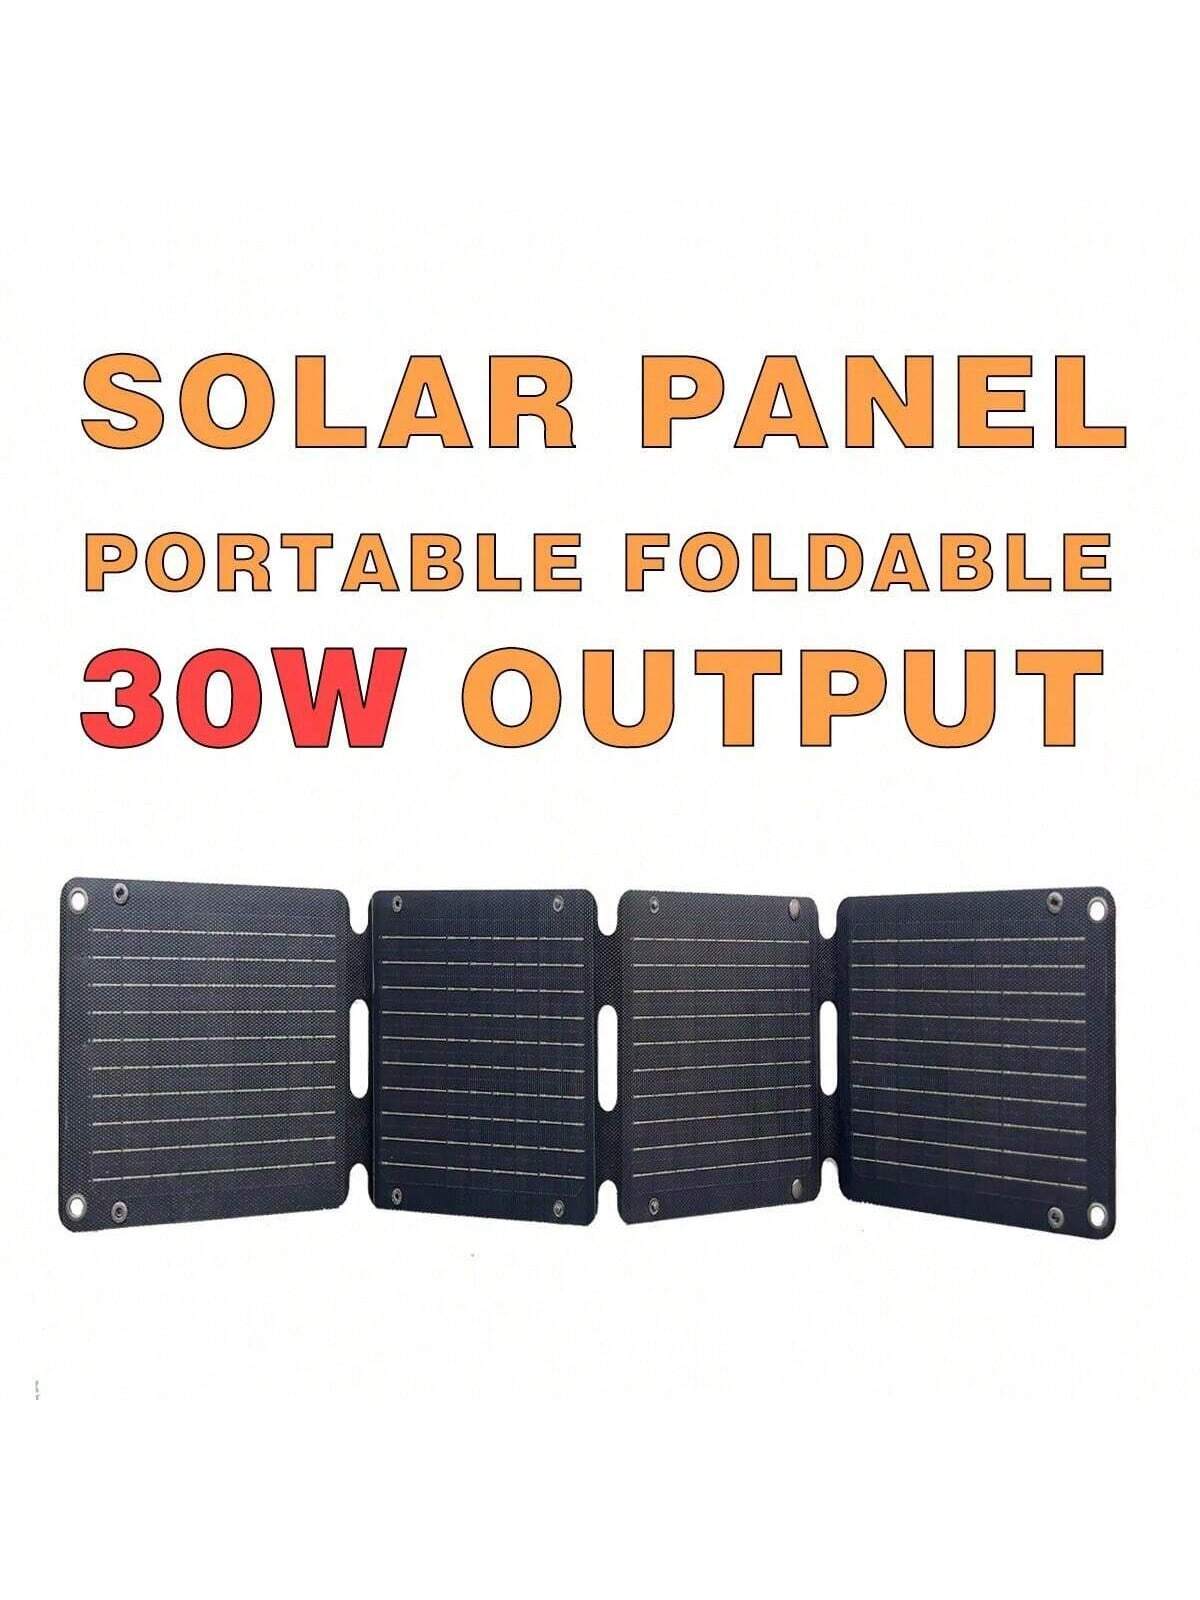 30W foldable portable solar panel fast charging USB/DC output with charging cable